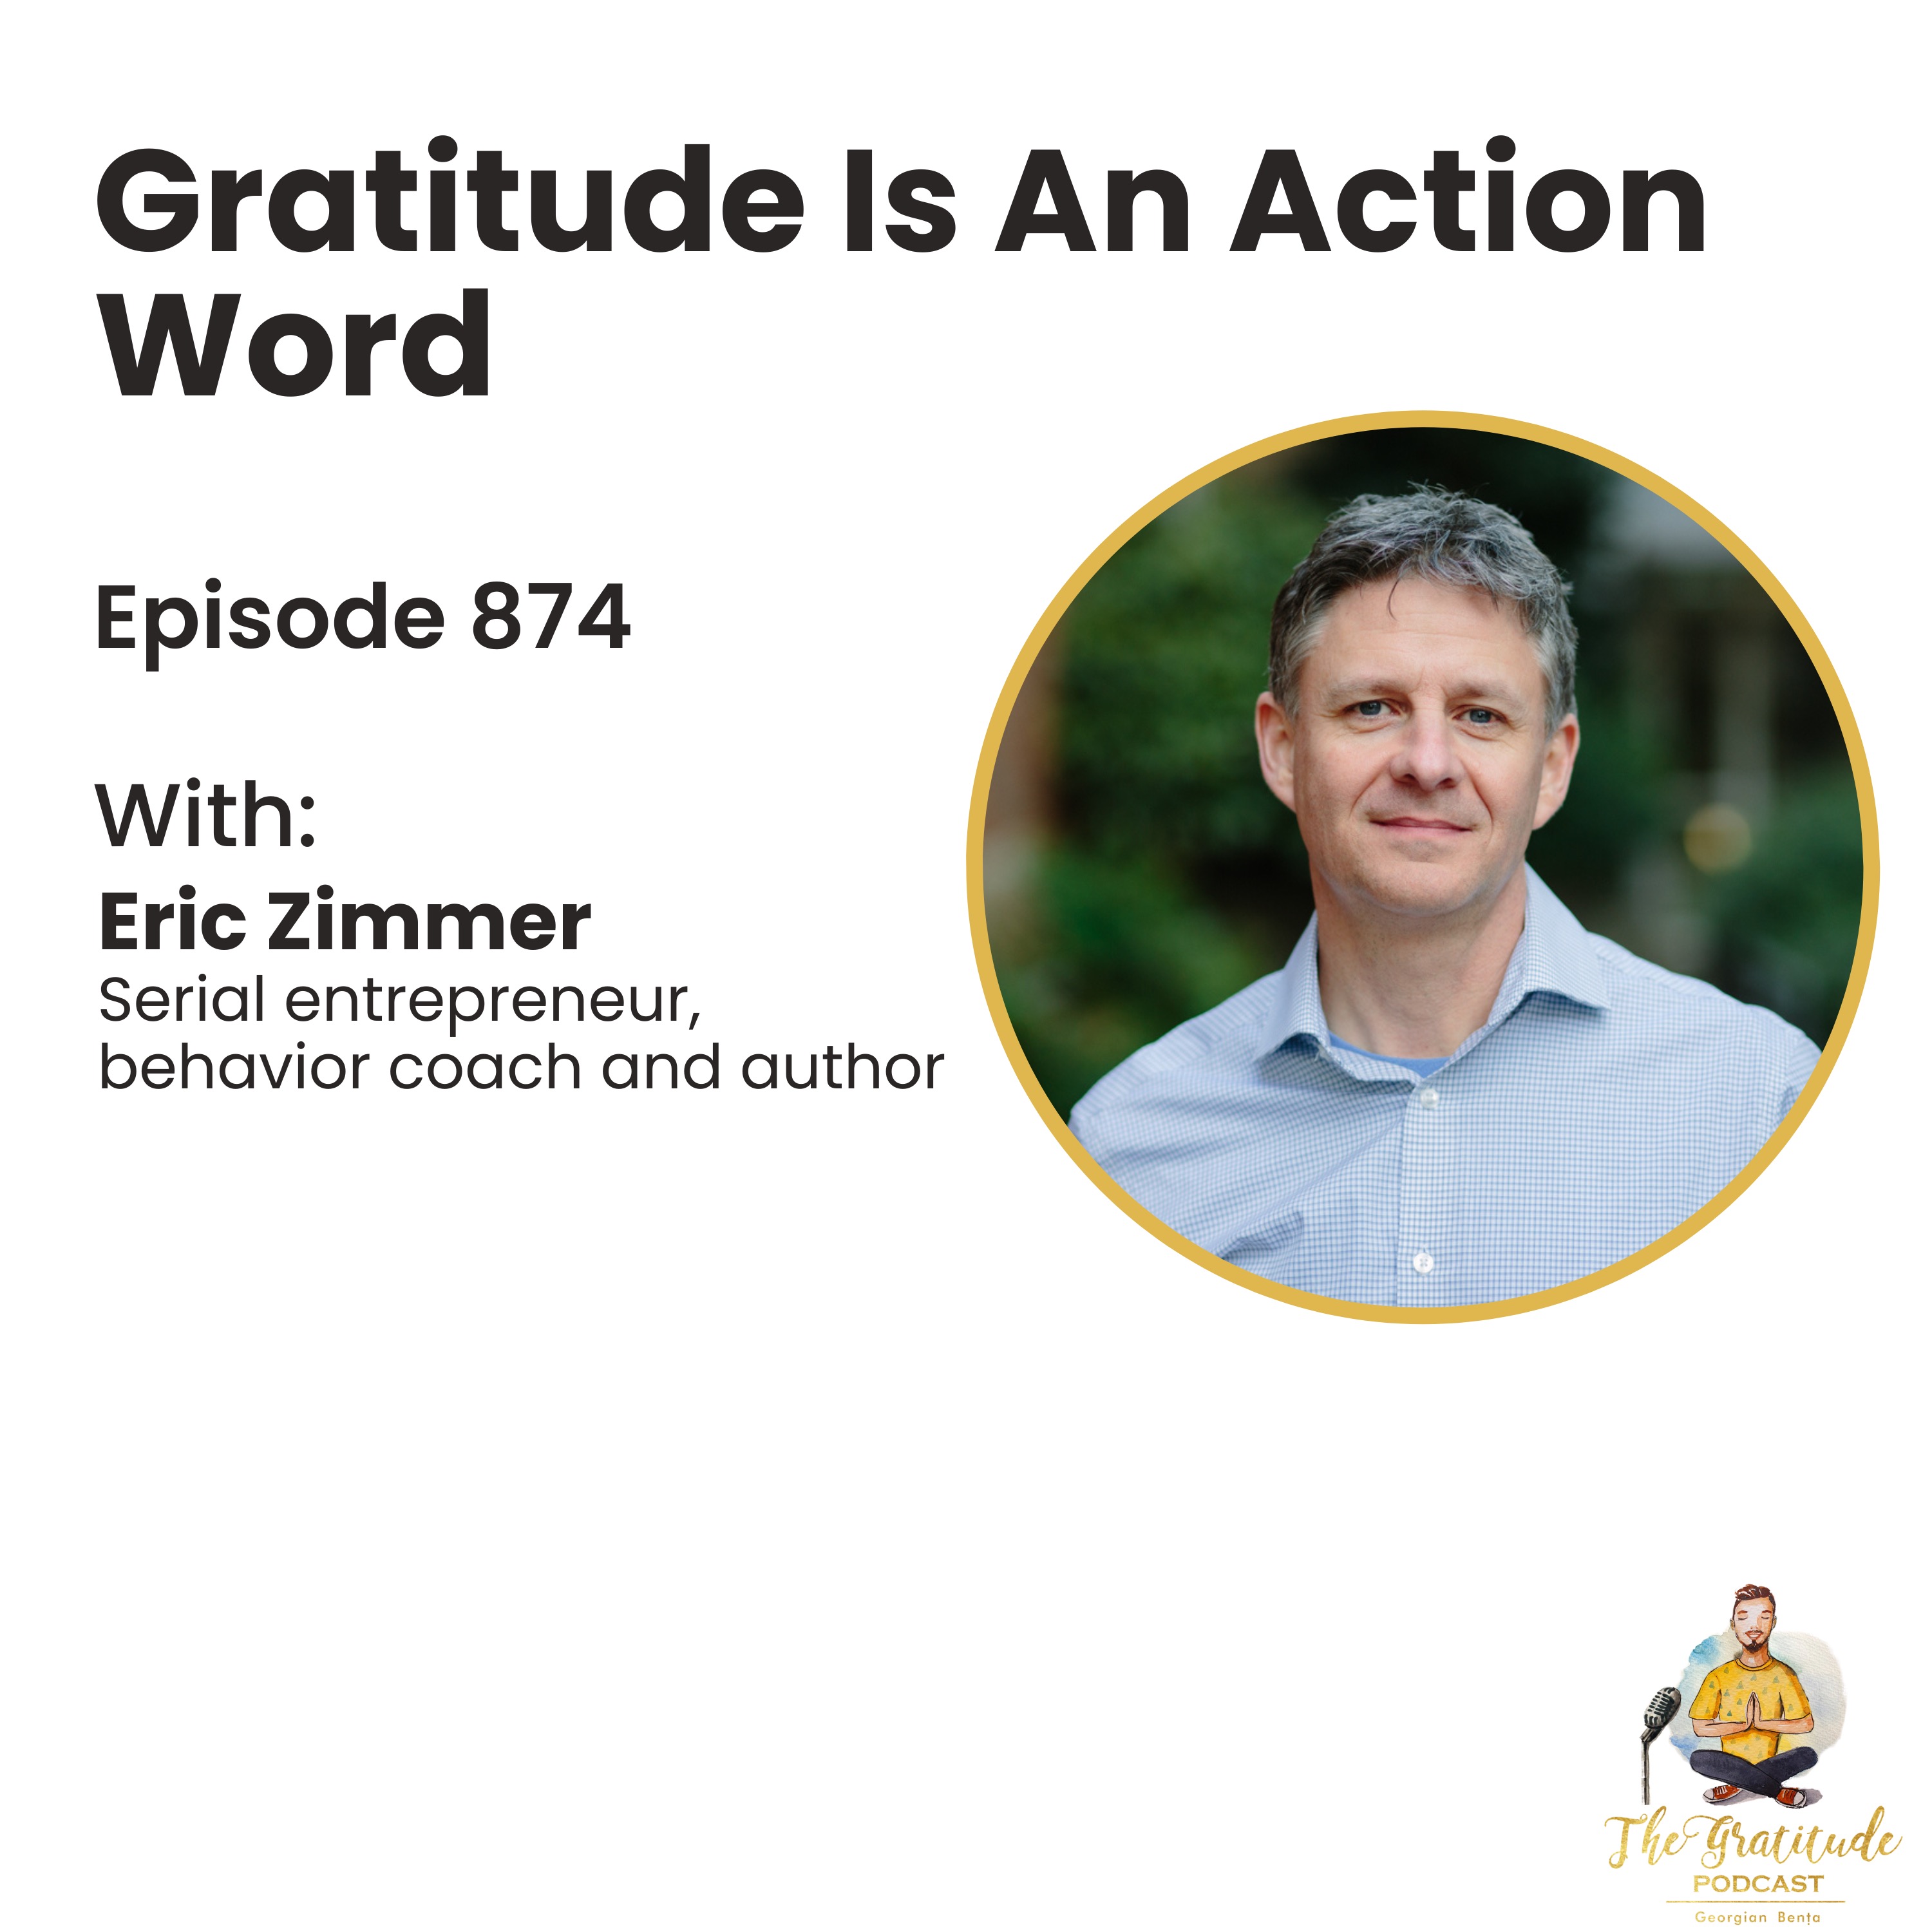 Gratitude Is An Action Word - Eric Zimmer (ep. 874)